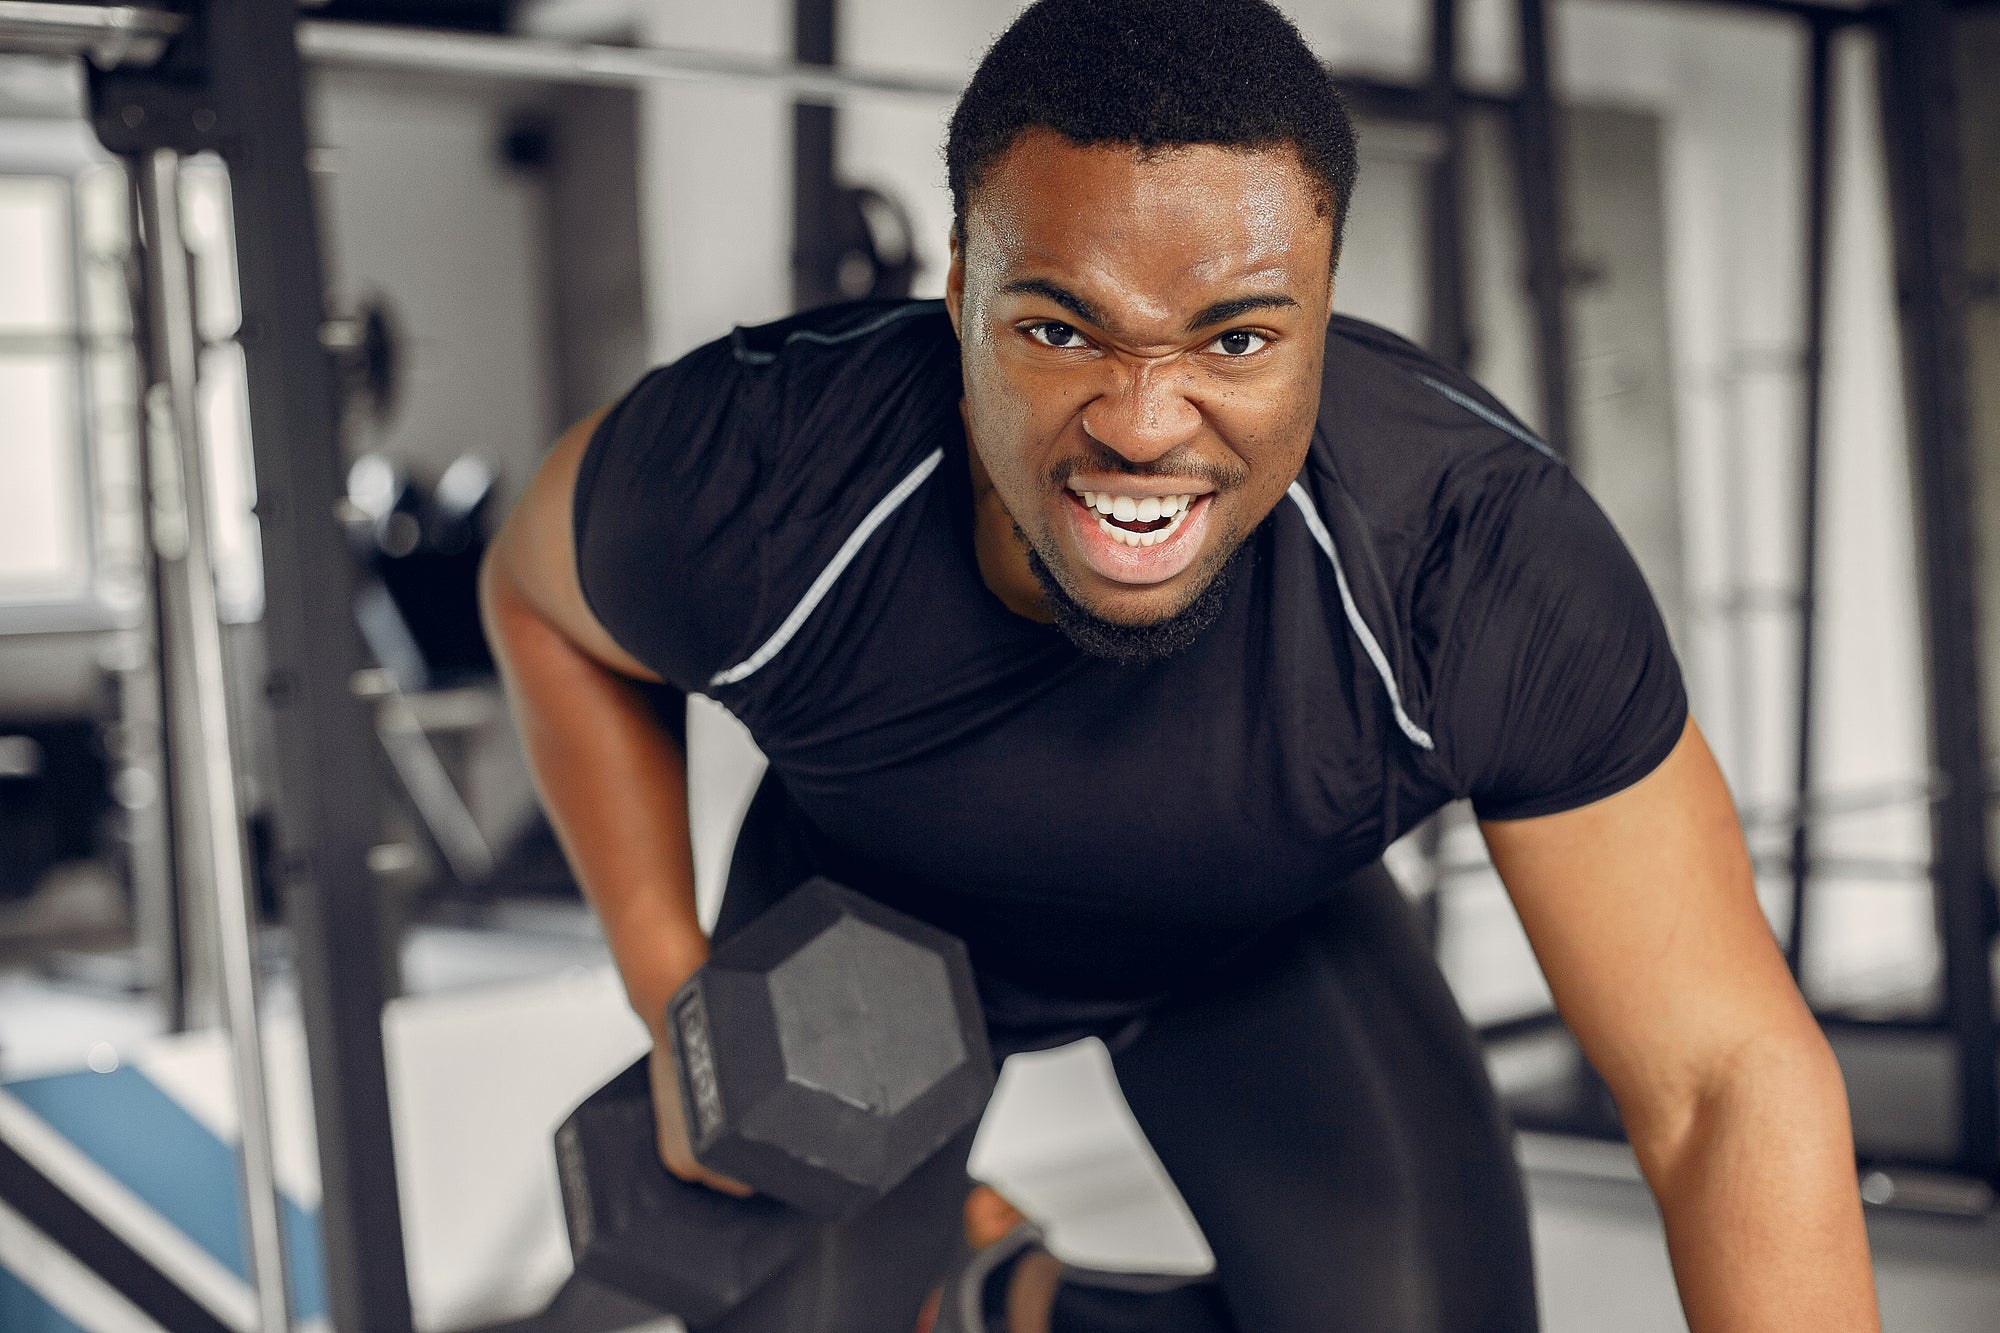 Black man exercising at the gym in men’s sports clothes